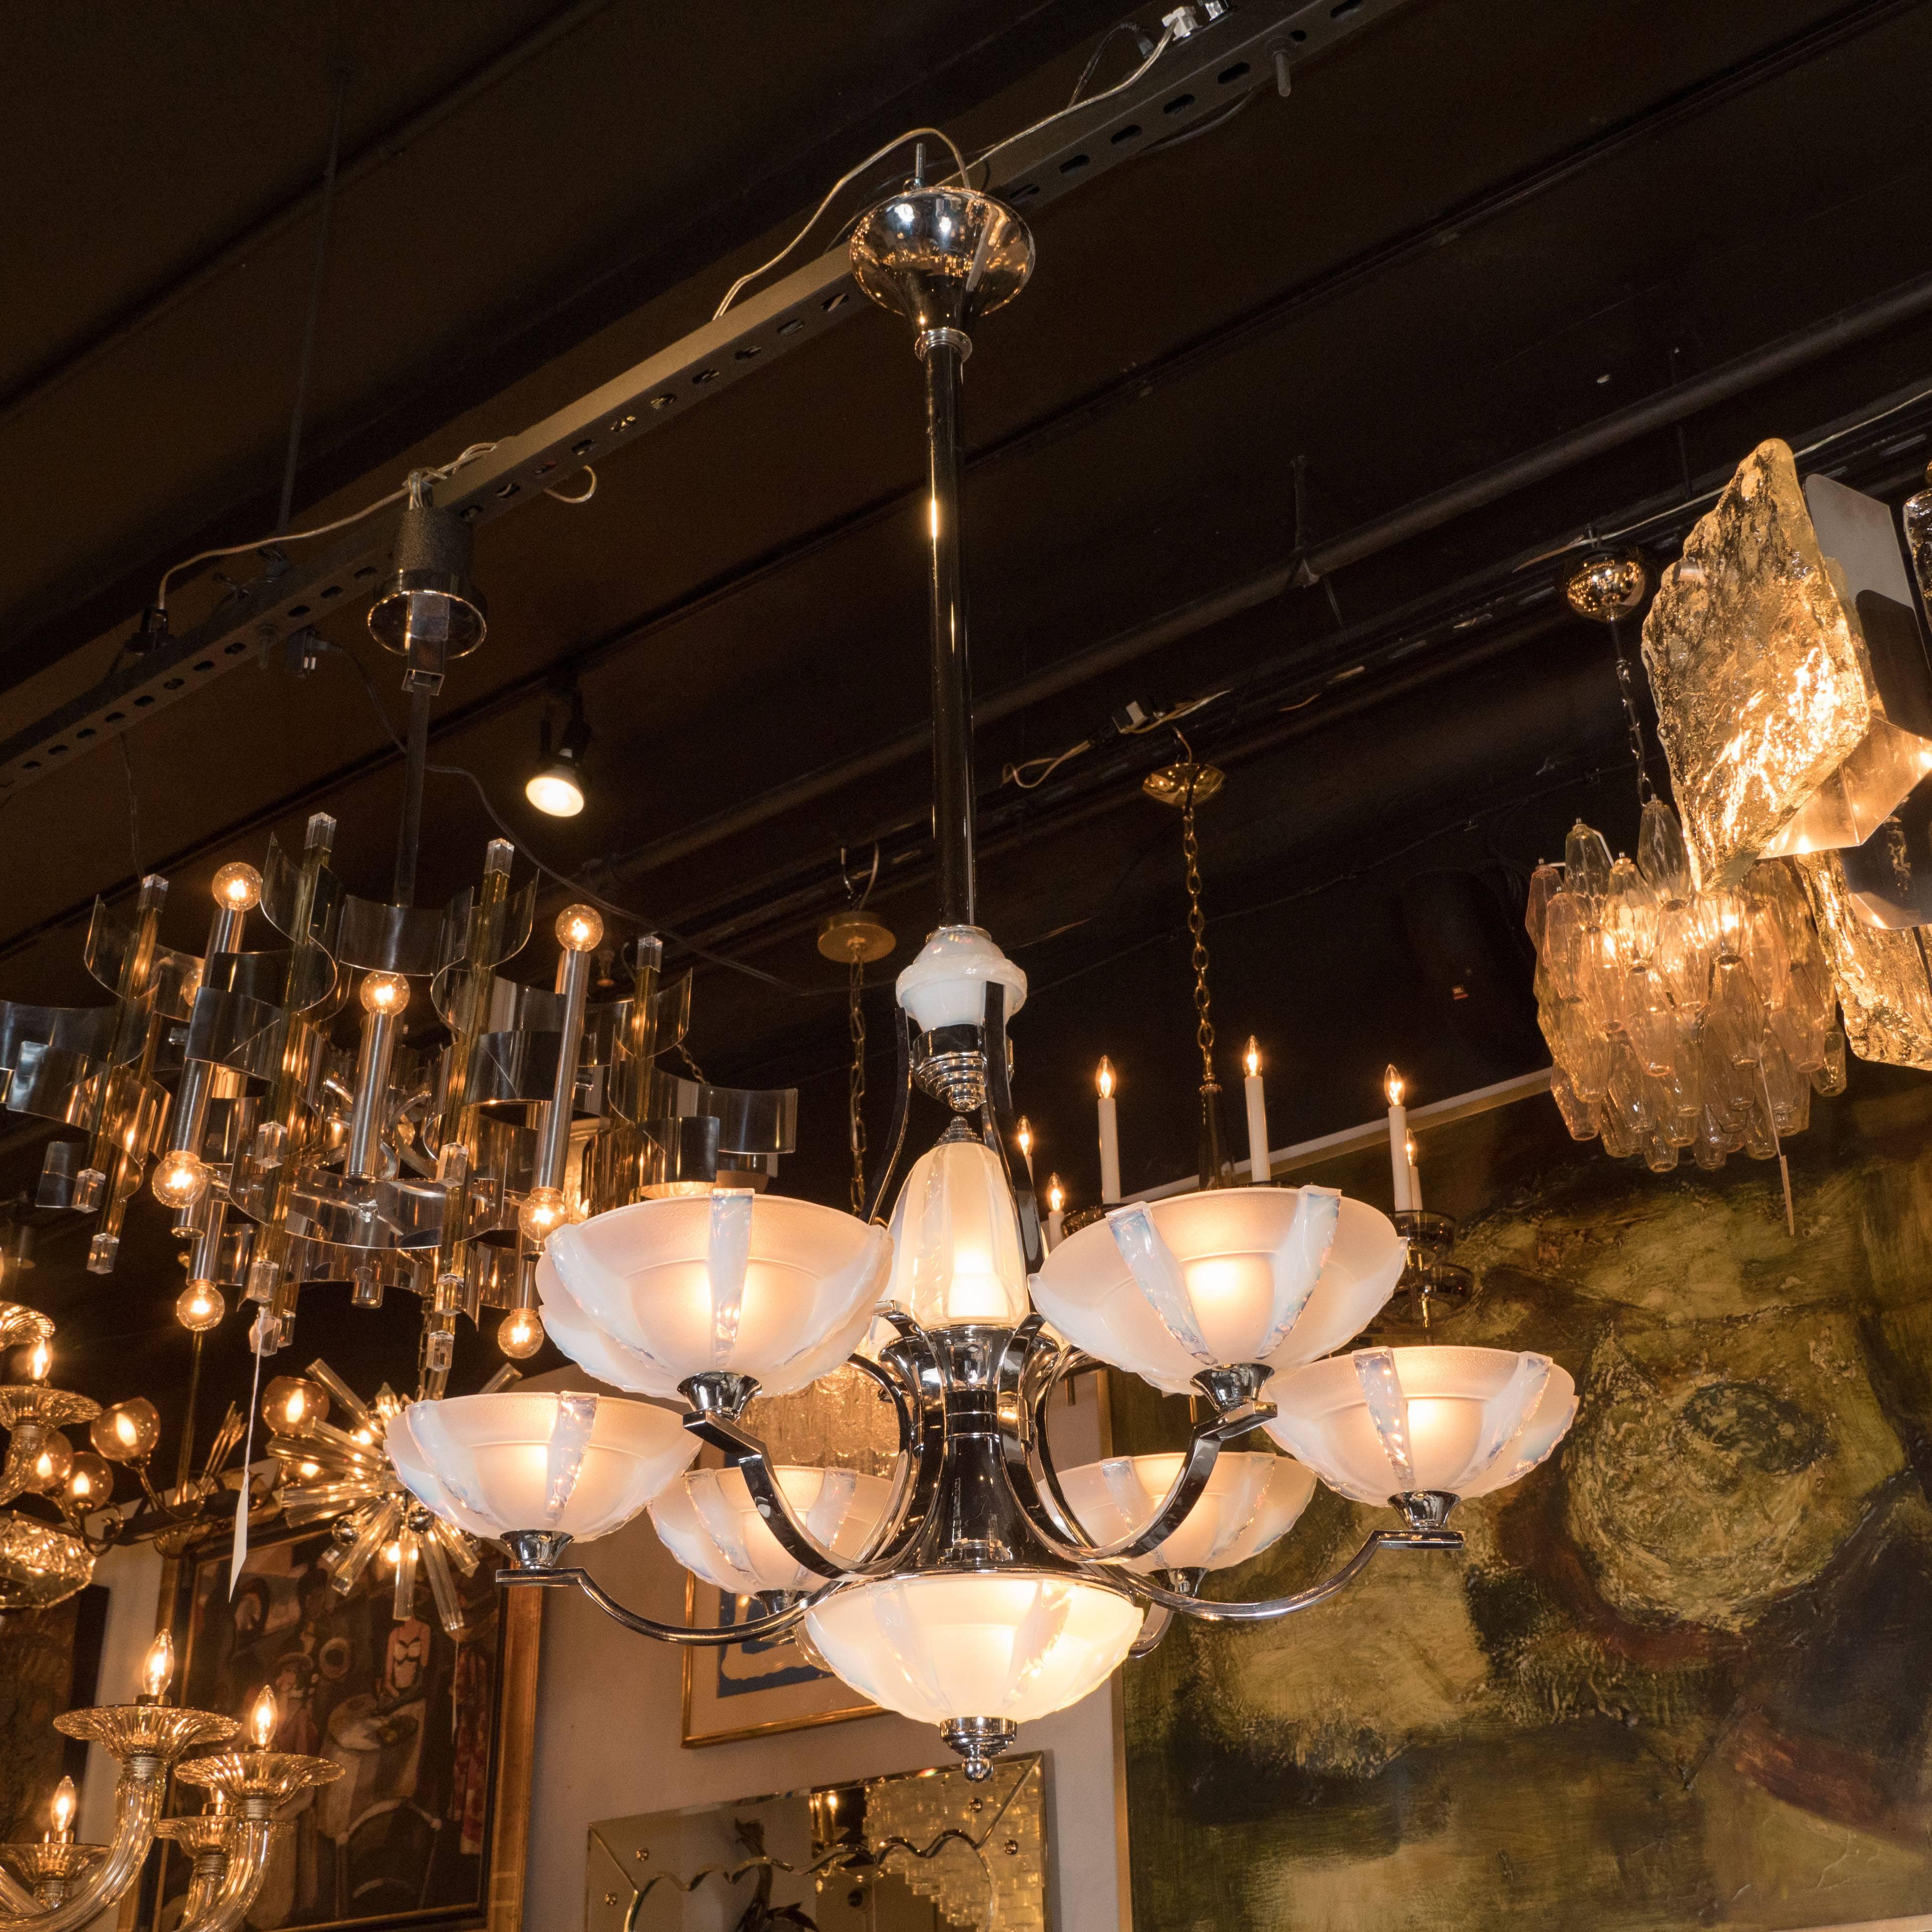 This stunning and graphic six arm chandelier was produced by Sabino- one of the most renowned lighting ateliers of the period in France, circa 1930. It features six streamlined chrome arms circumscribe an hour glass form also in polished chrome. The